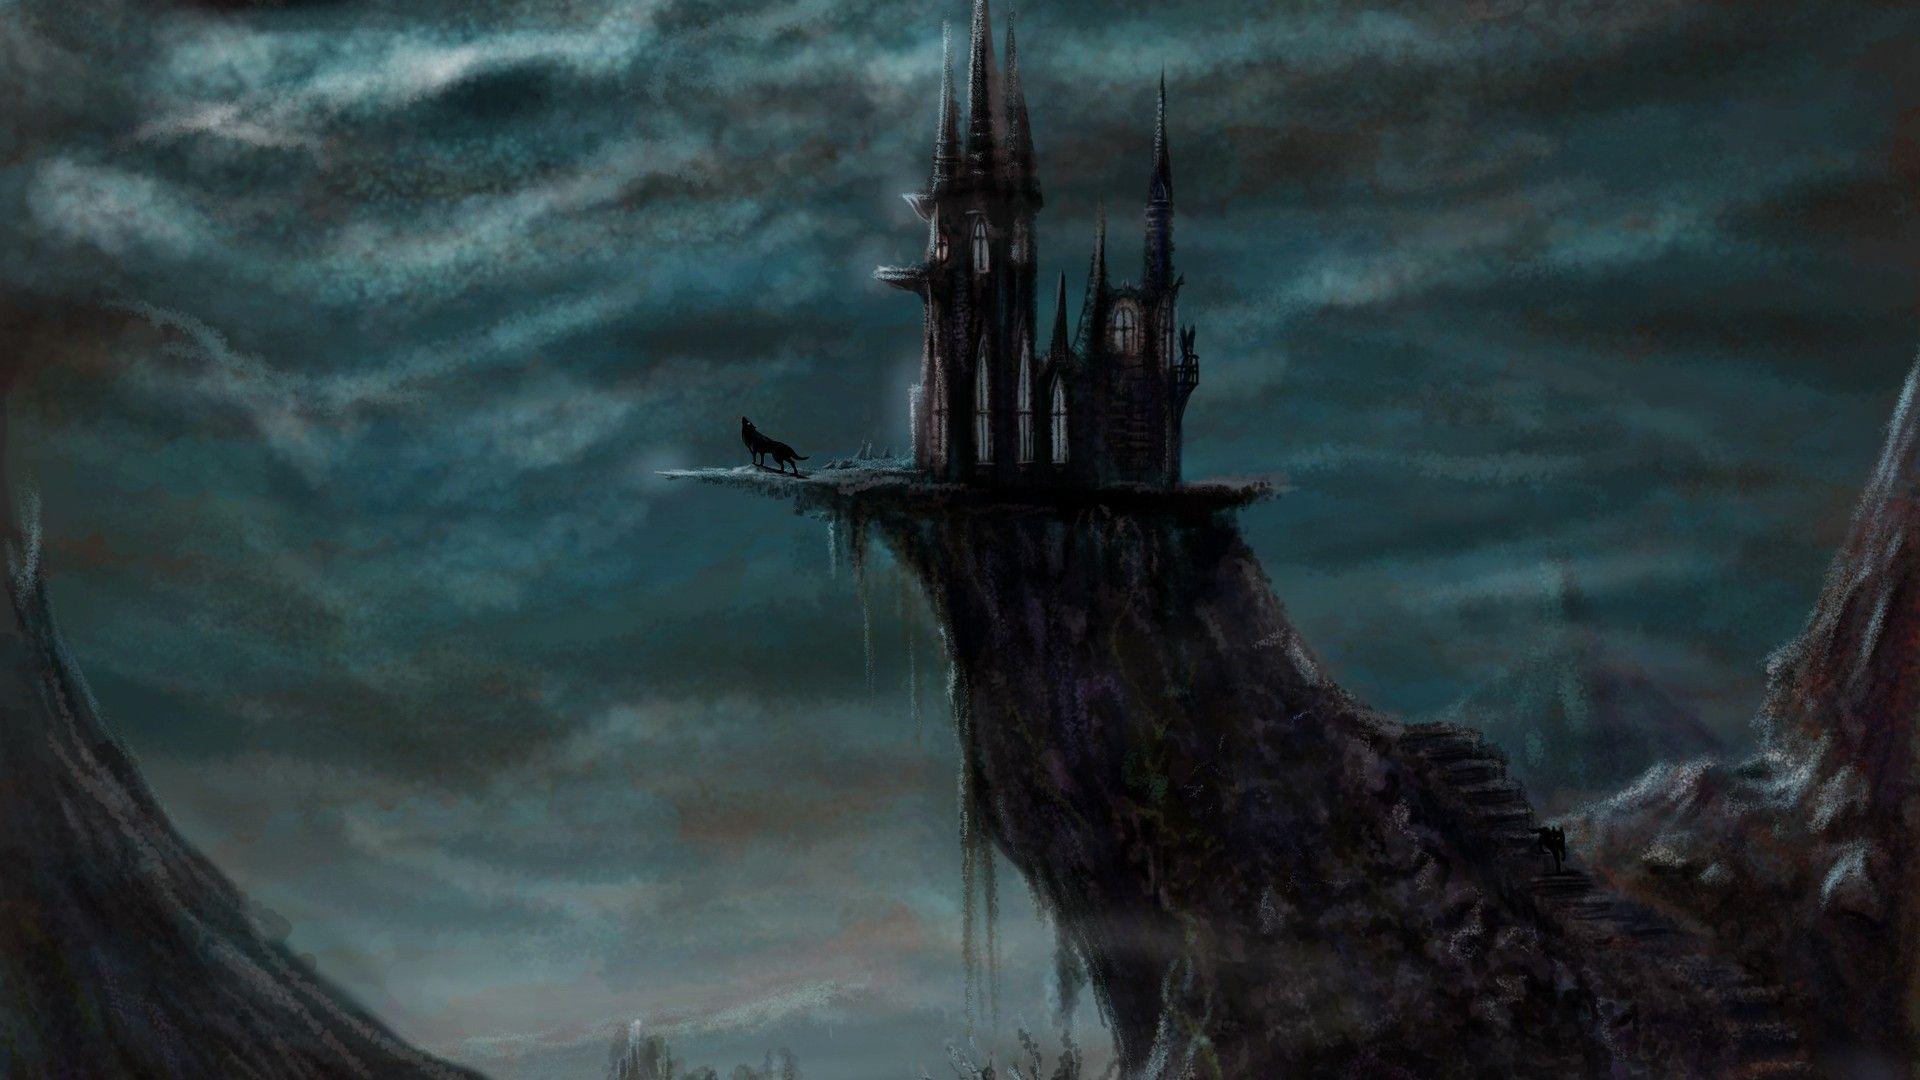 Scary Castles You Are Viewing A Fantasy 1920x1080 #scary